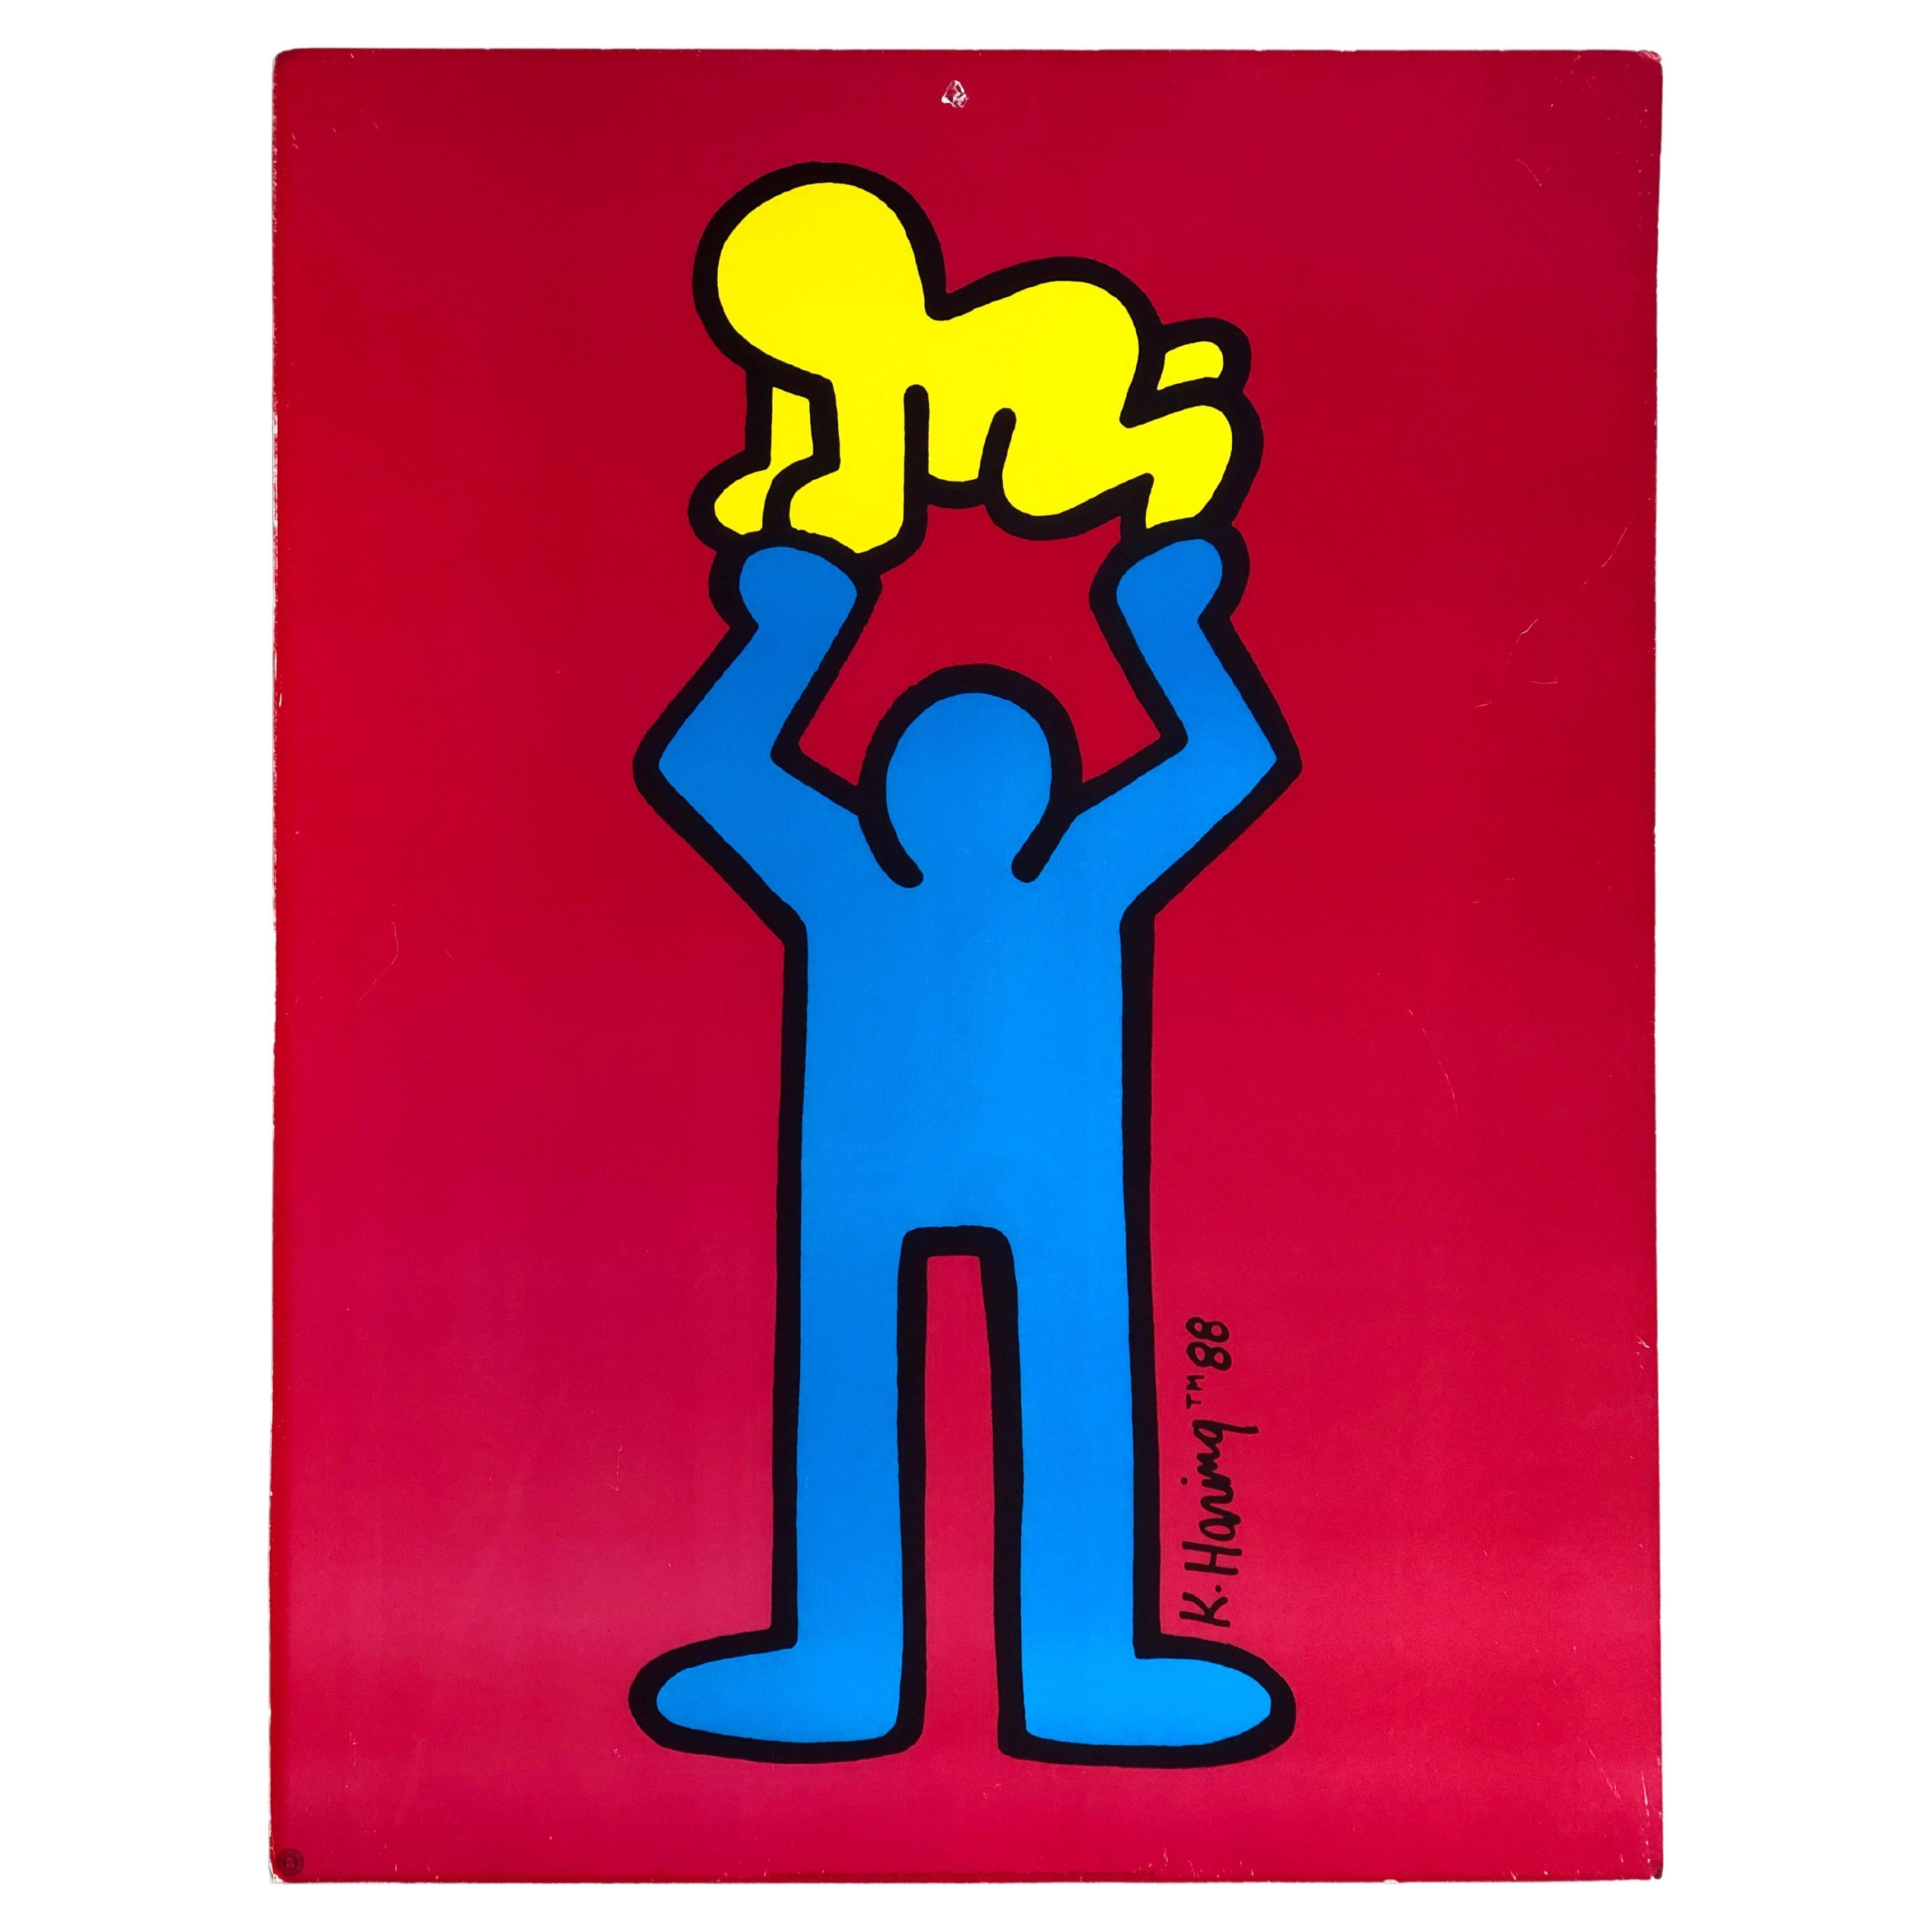 Keith Haring 1991 - Man Holding Radiant Baby - Pop Art print on thick cardboard